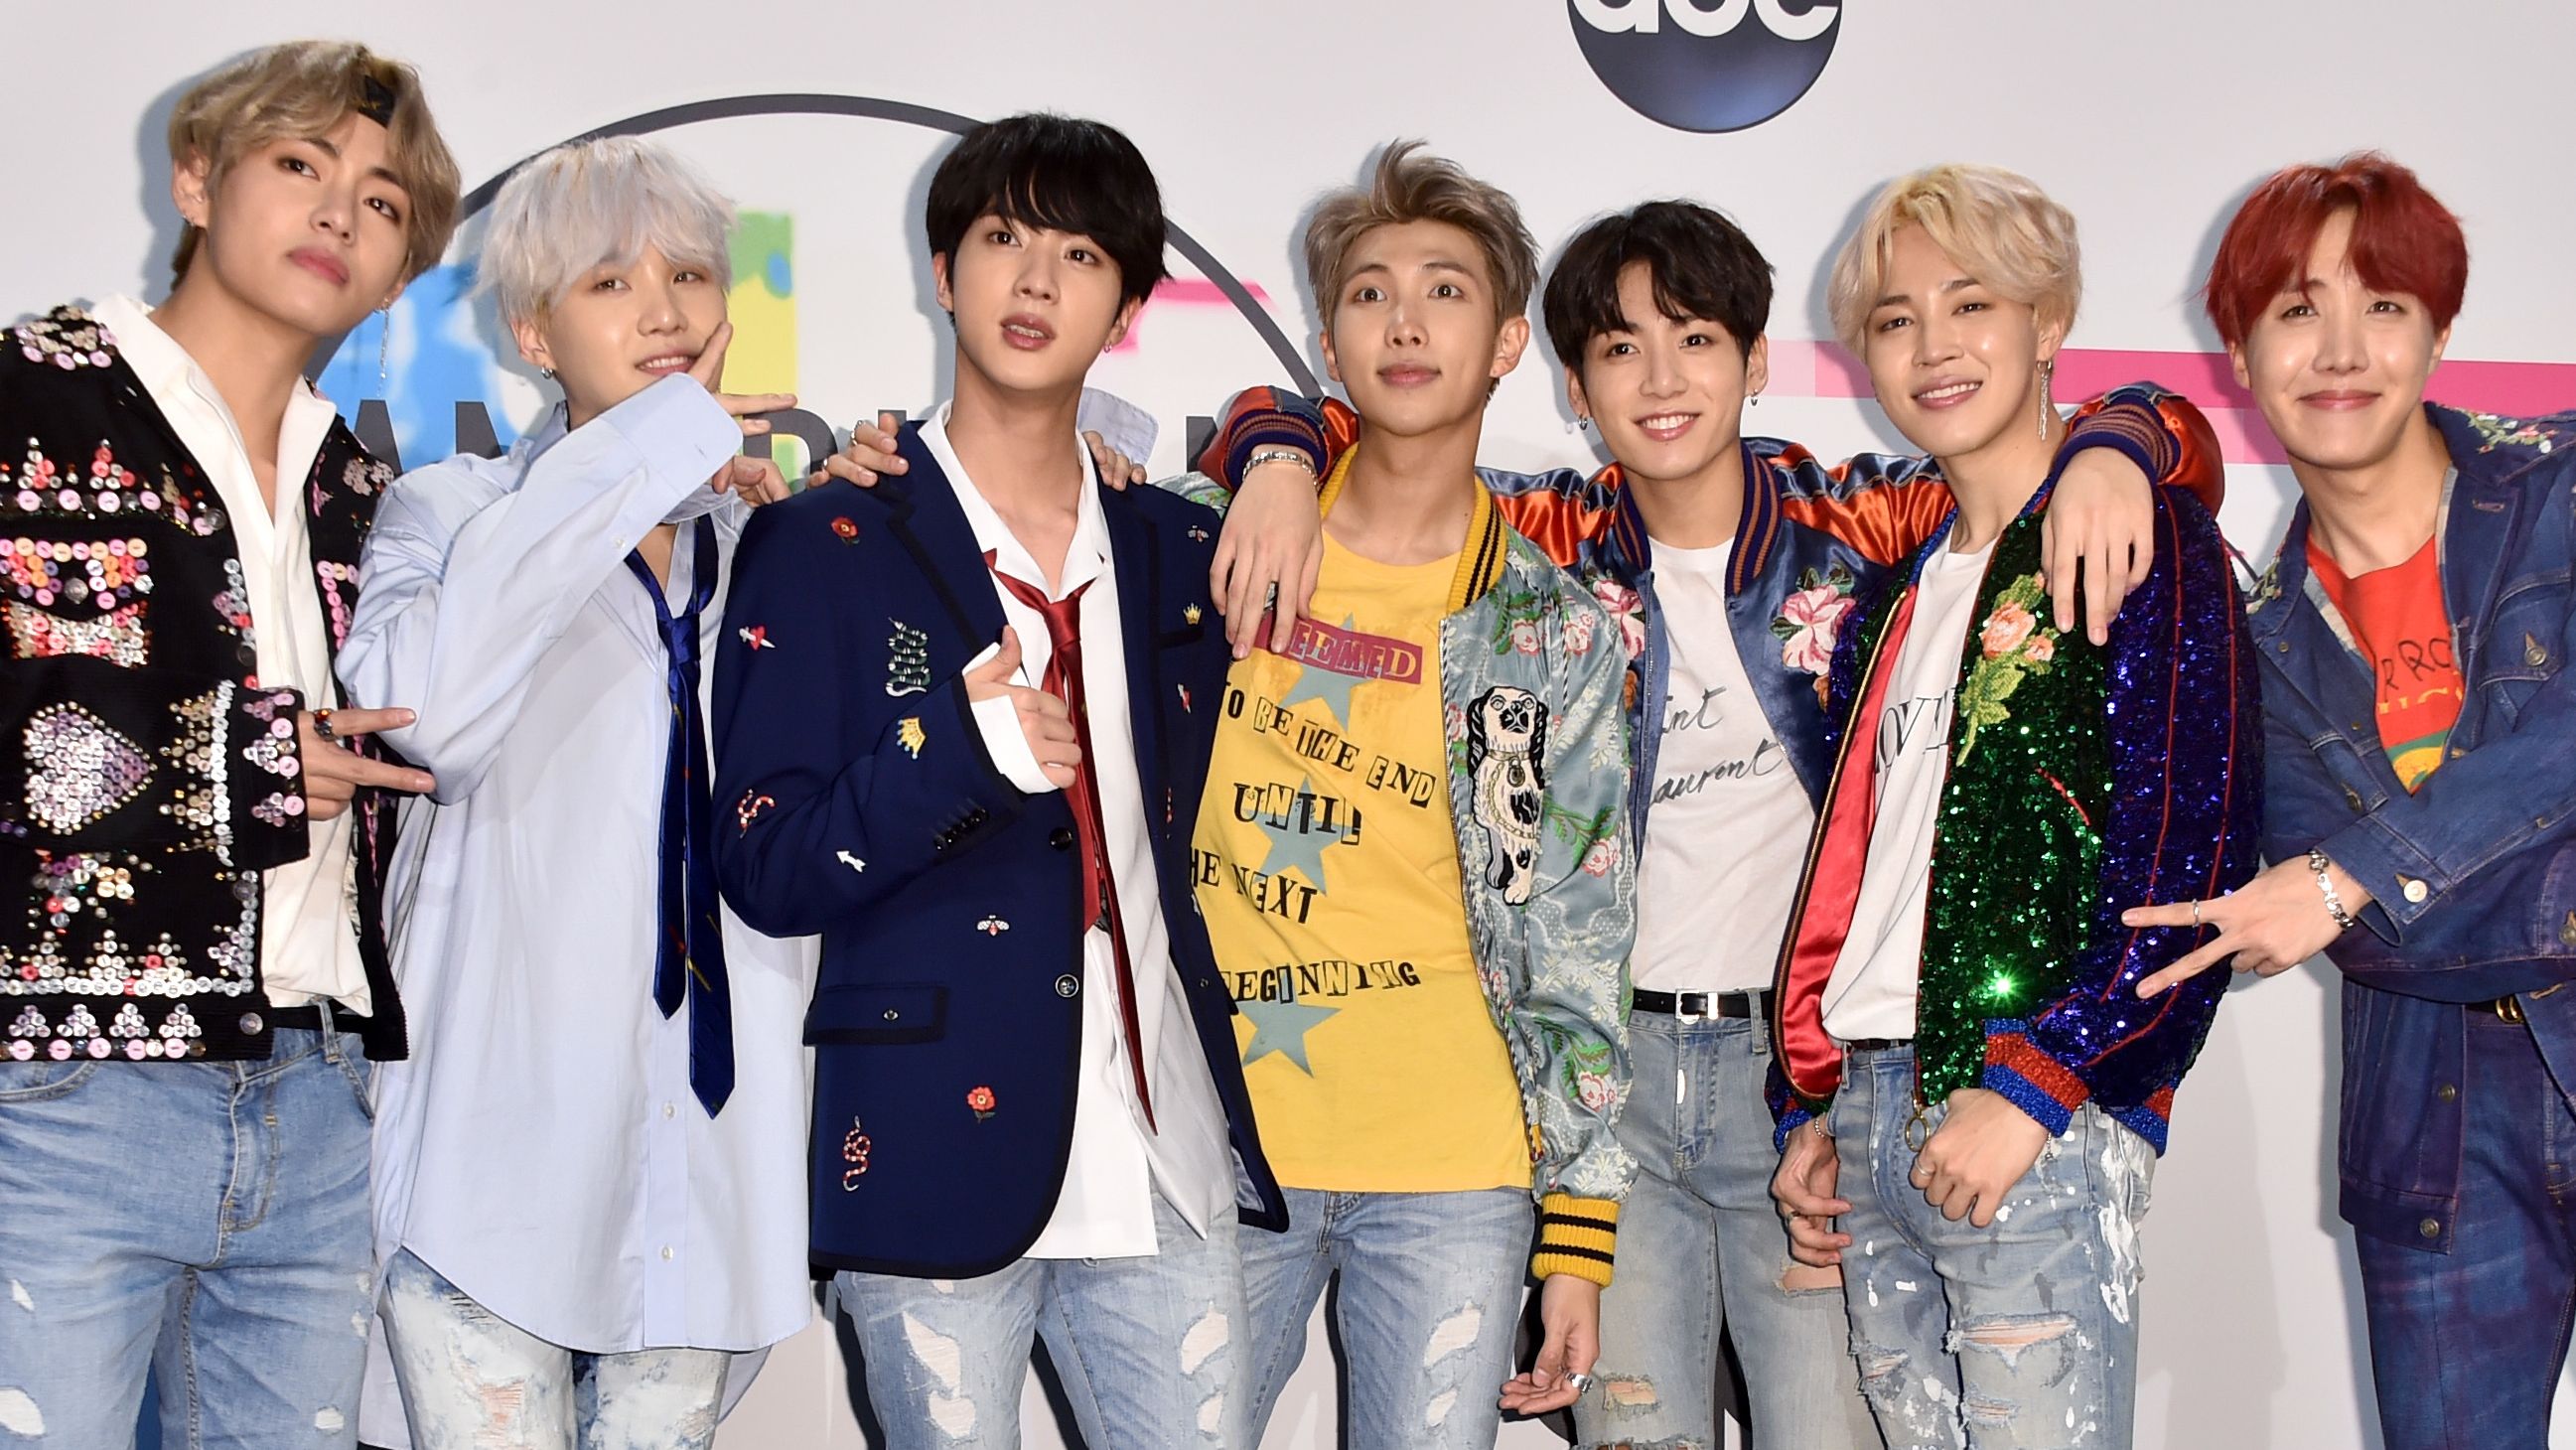 nieuws Vertrappen storm How BTS became the world's biggest boy band | CNN